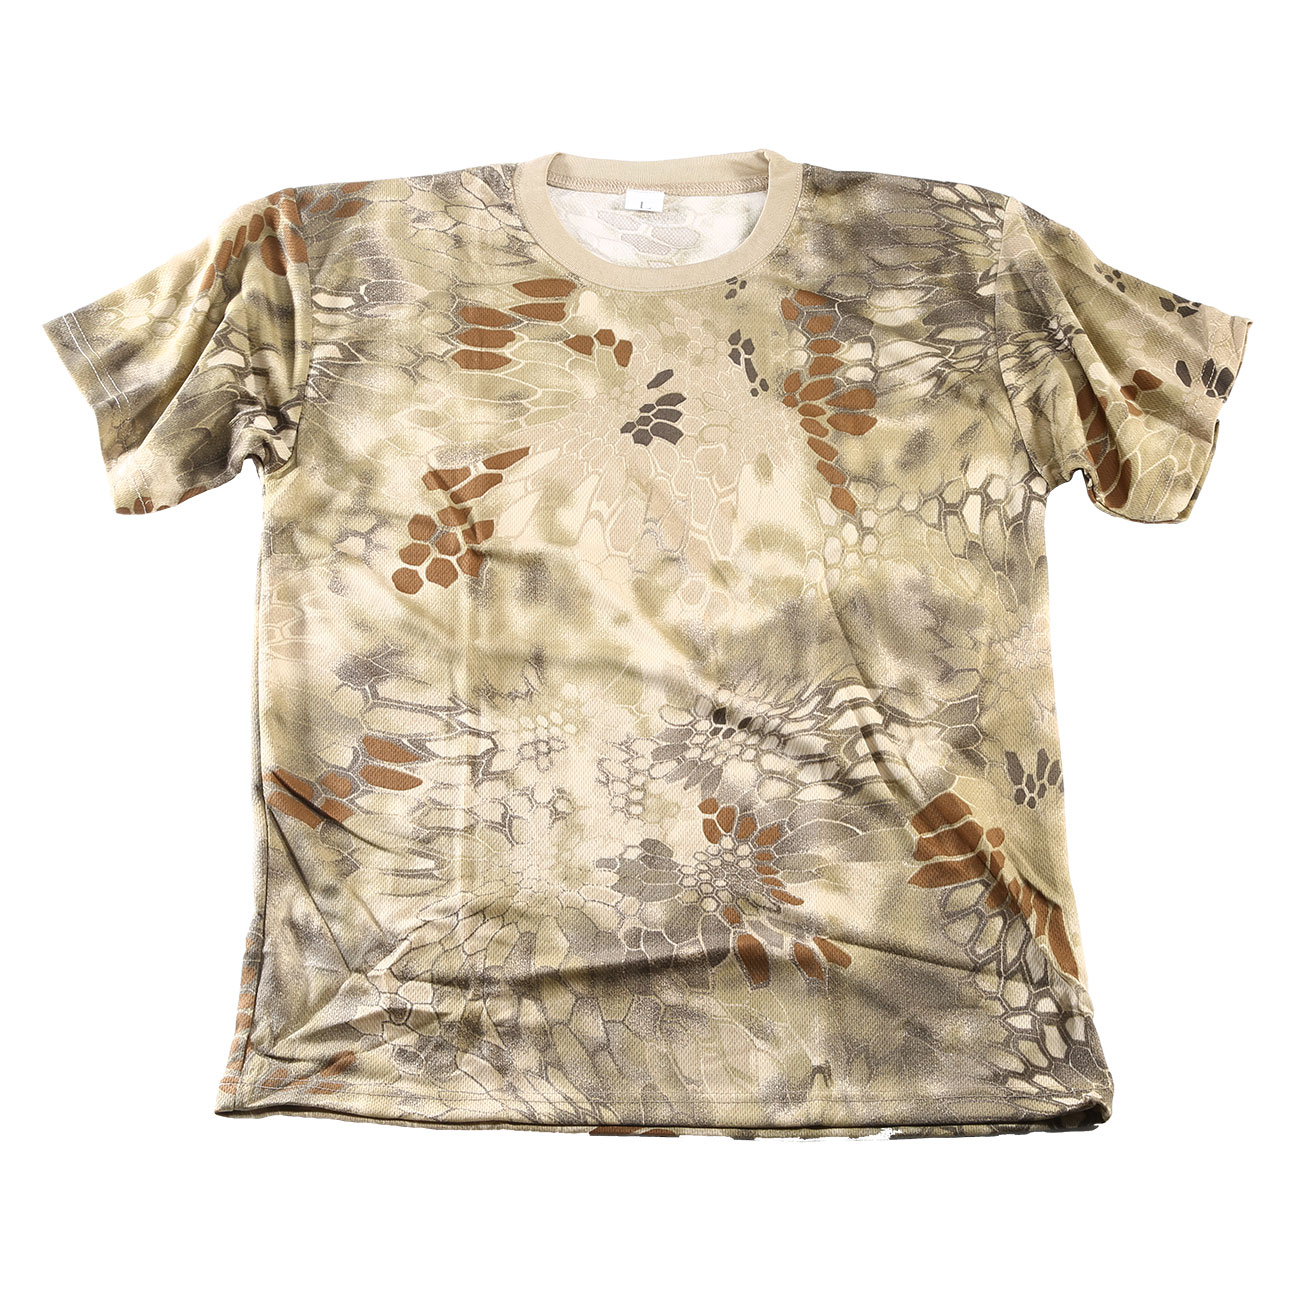 Barbaric T-Shirt Python coyote Polyester